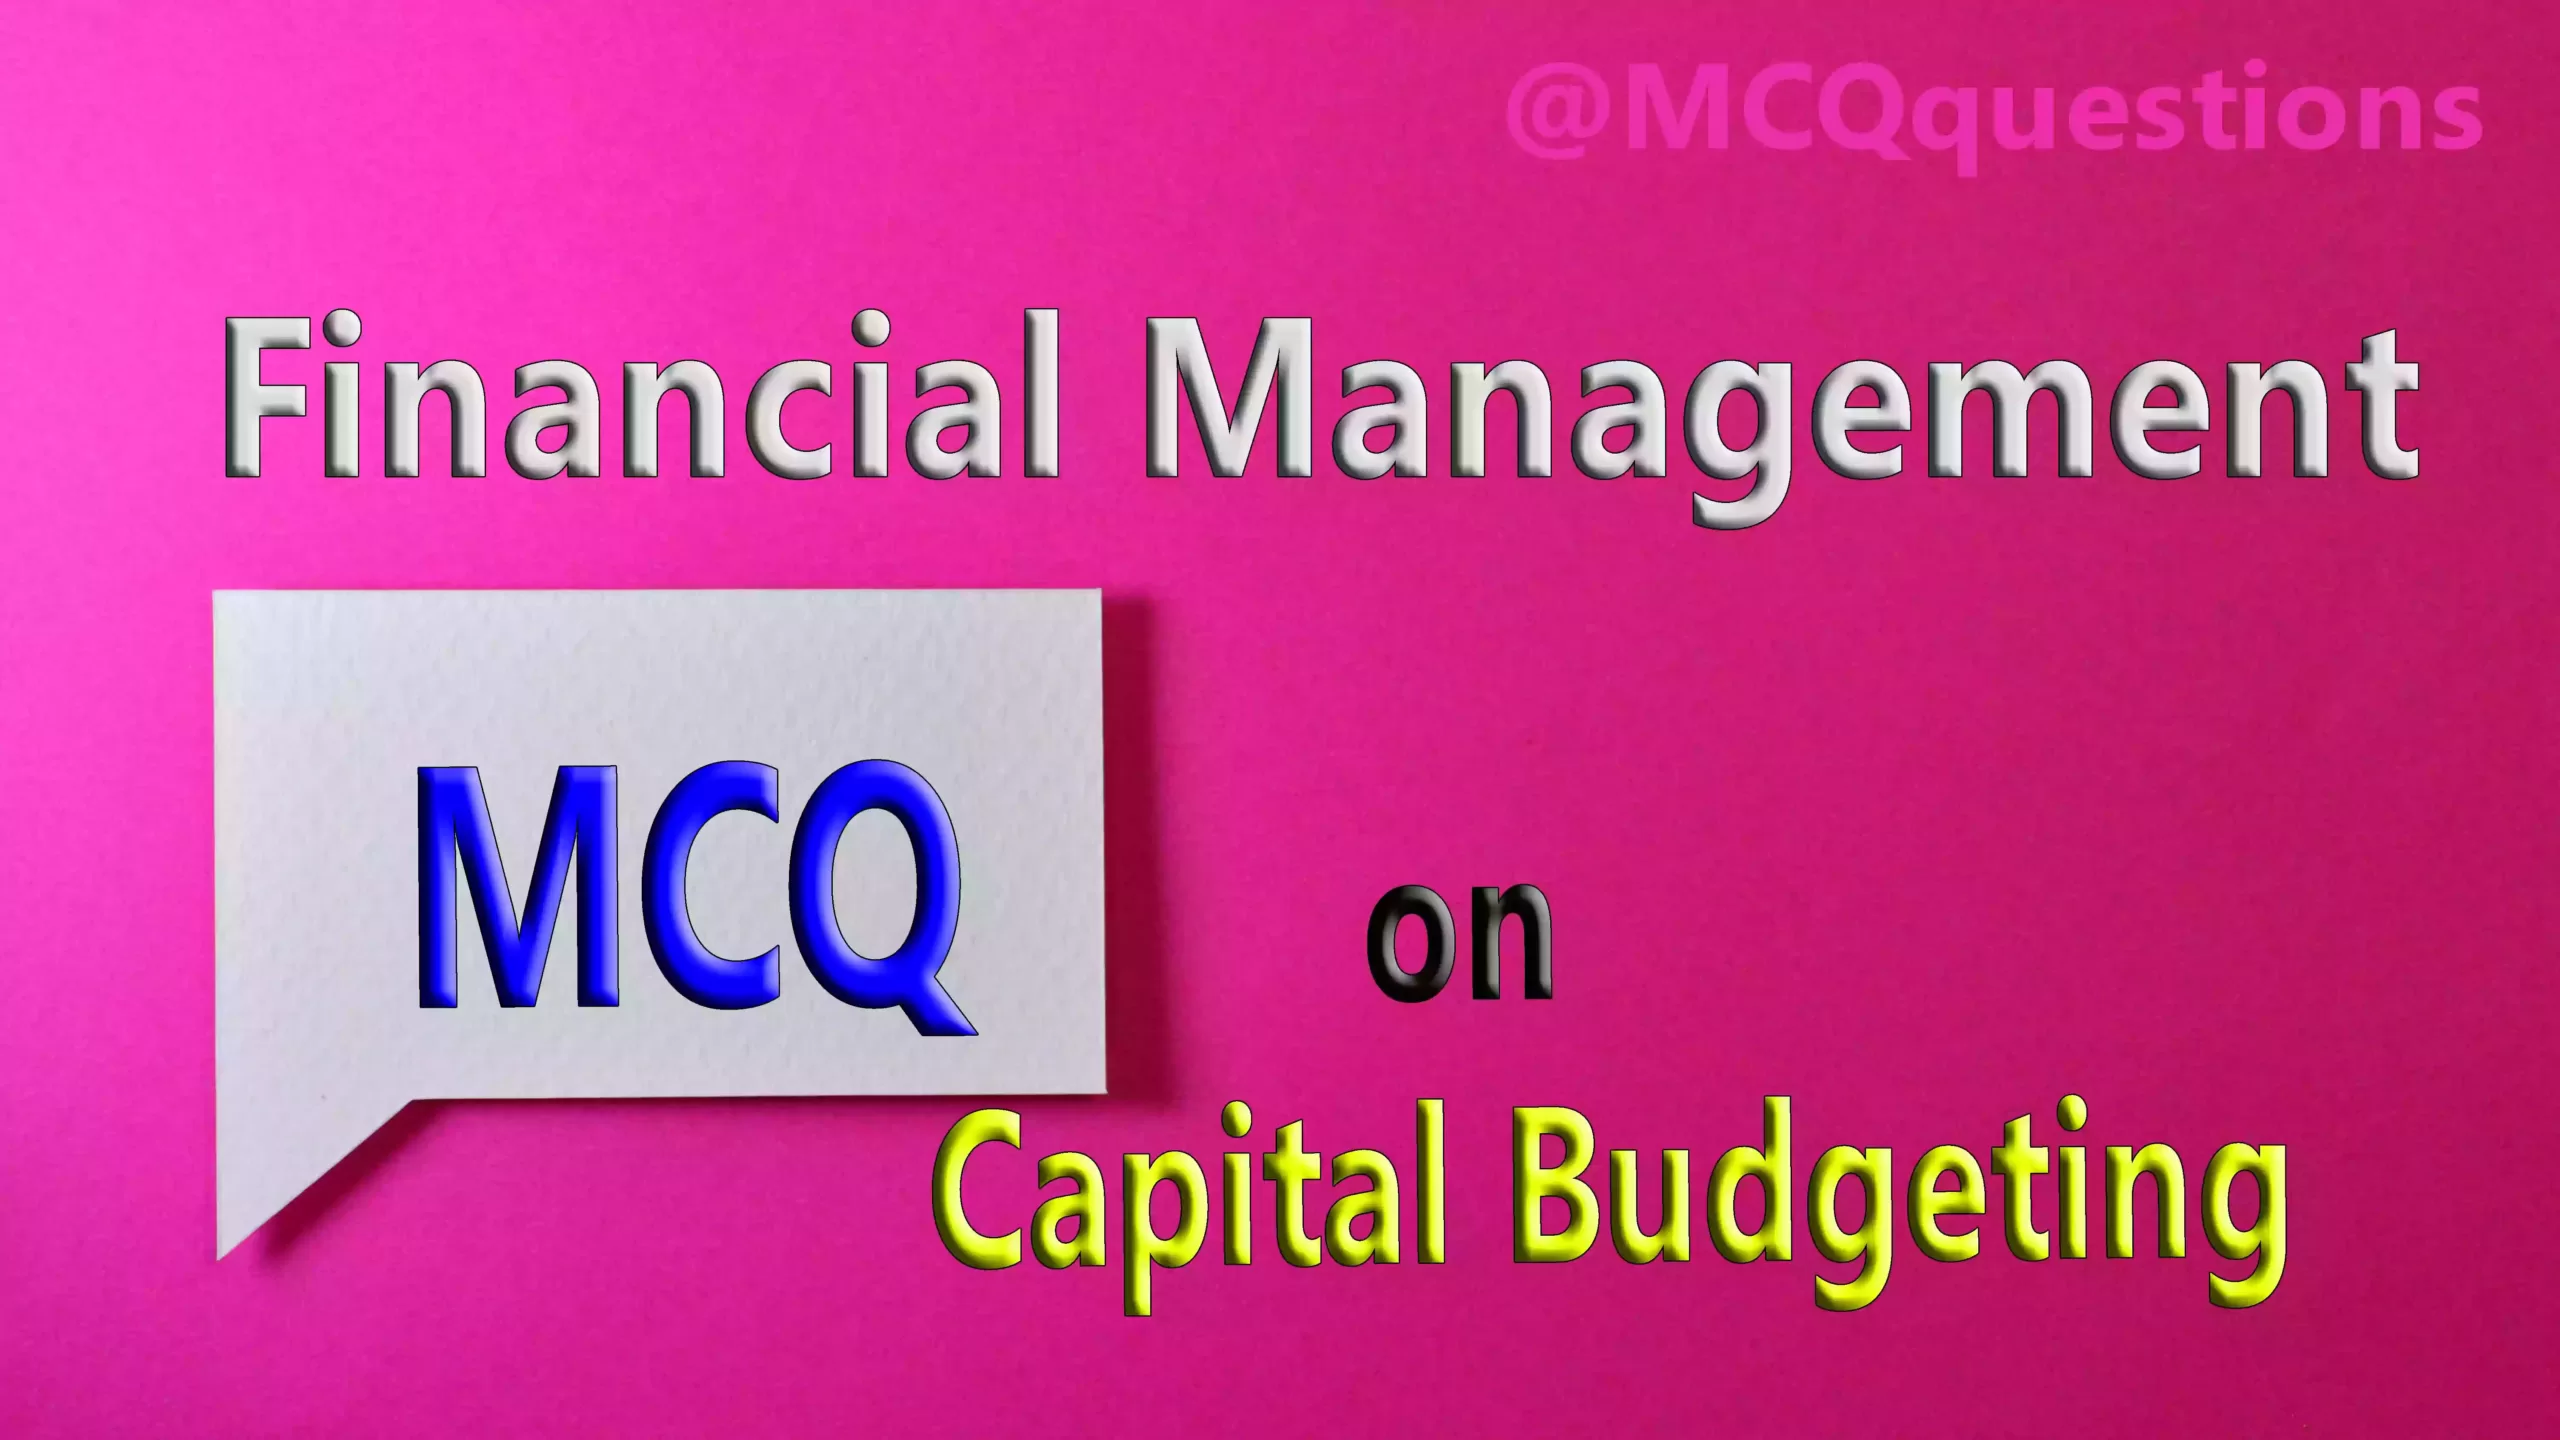 Financial Management MCQ on Capital Budgeting